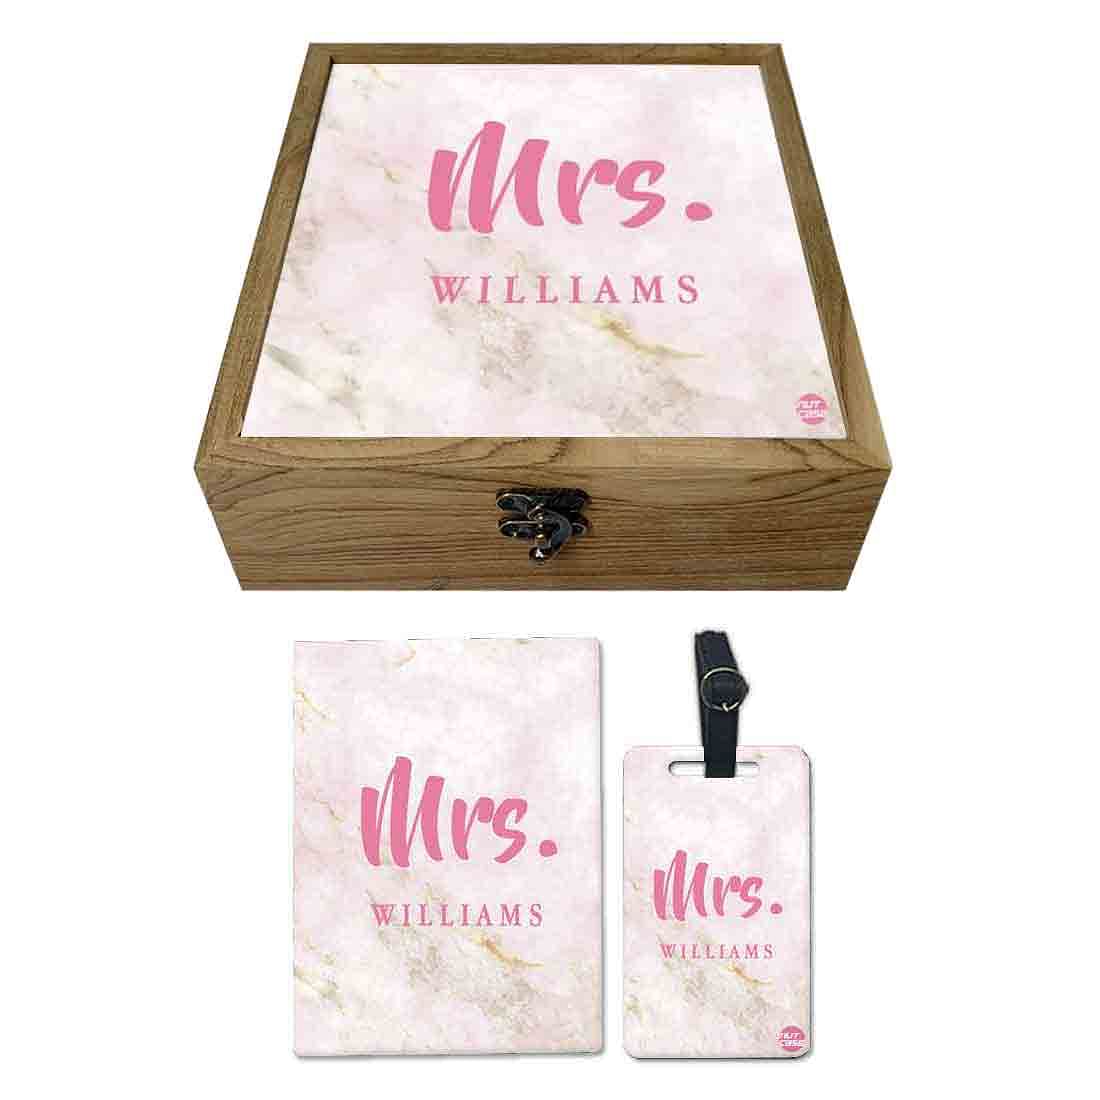 Cutom Passport Cover For Couples Anniversary Gift - Mrs Pink Marble Nutcase